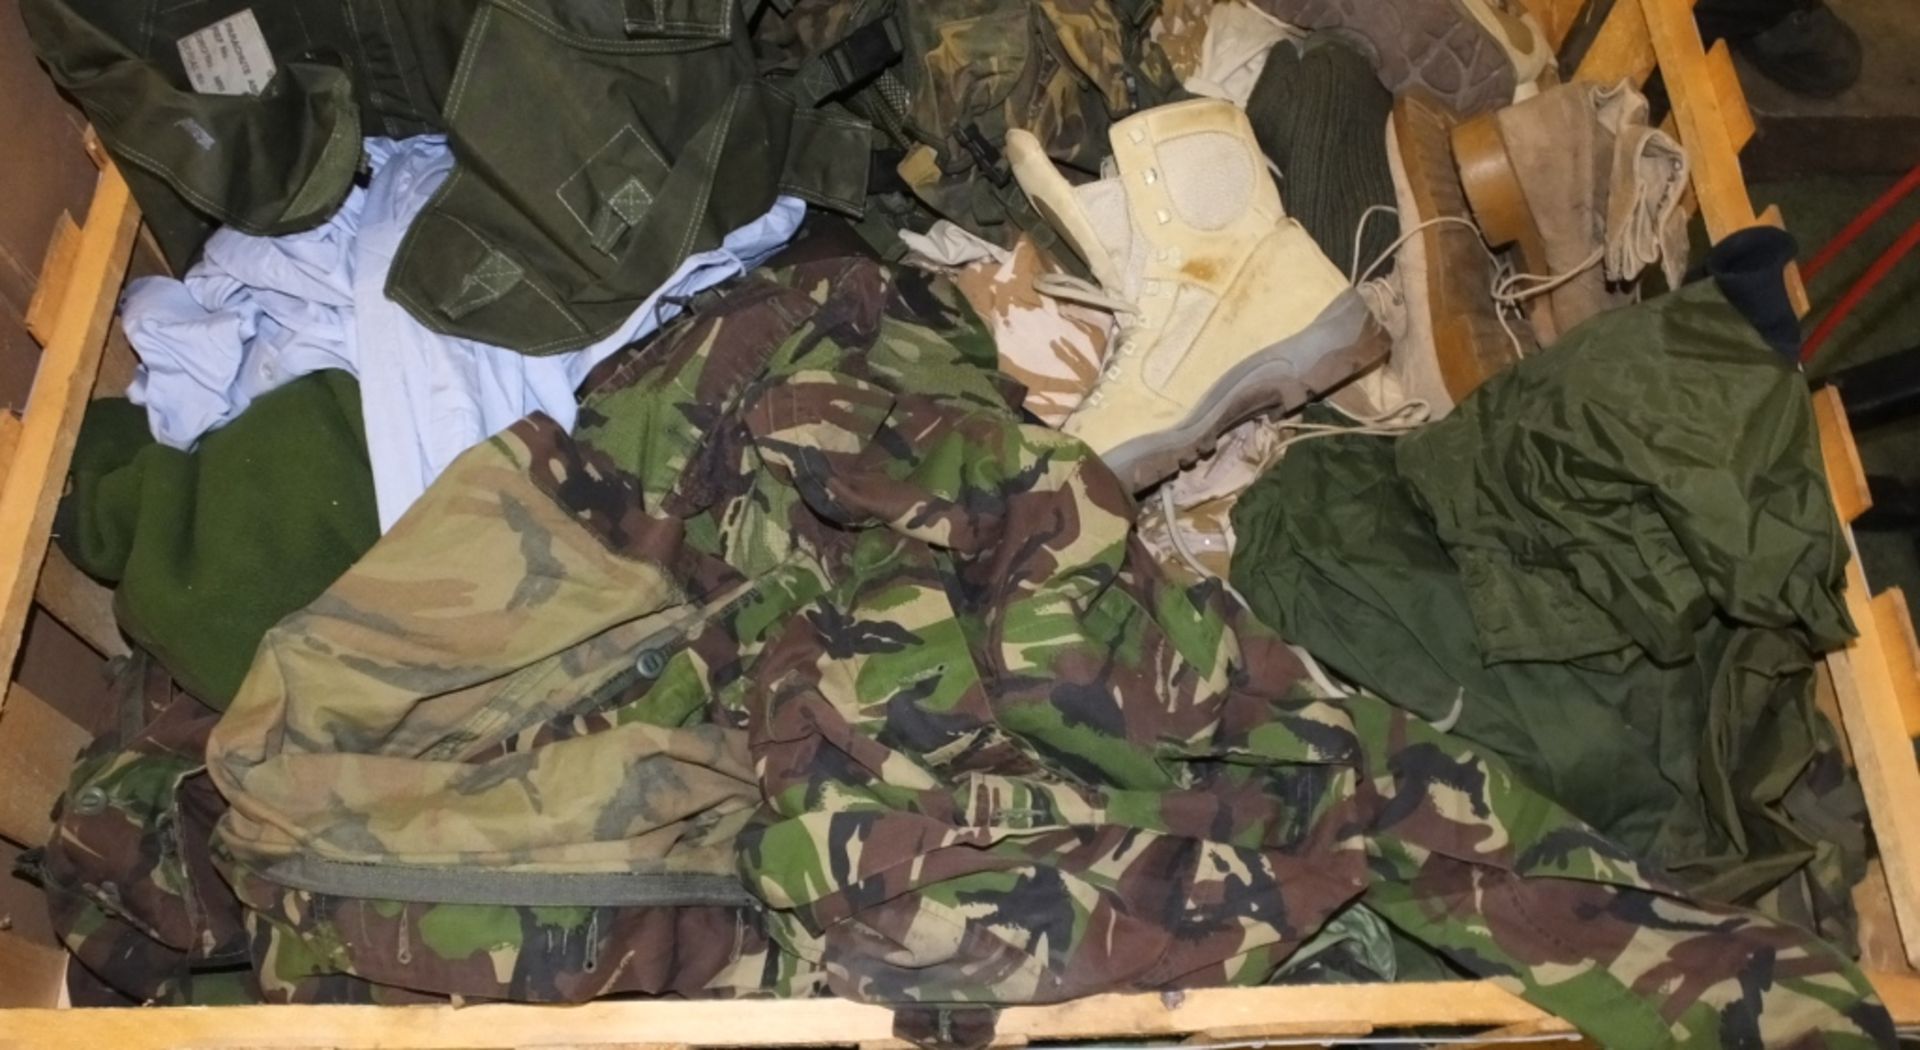 Military clothing - Boots, Jackets, Jumpers, Trousers, Shirts, Holdall bags - Image 2 of 3